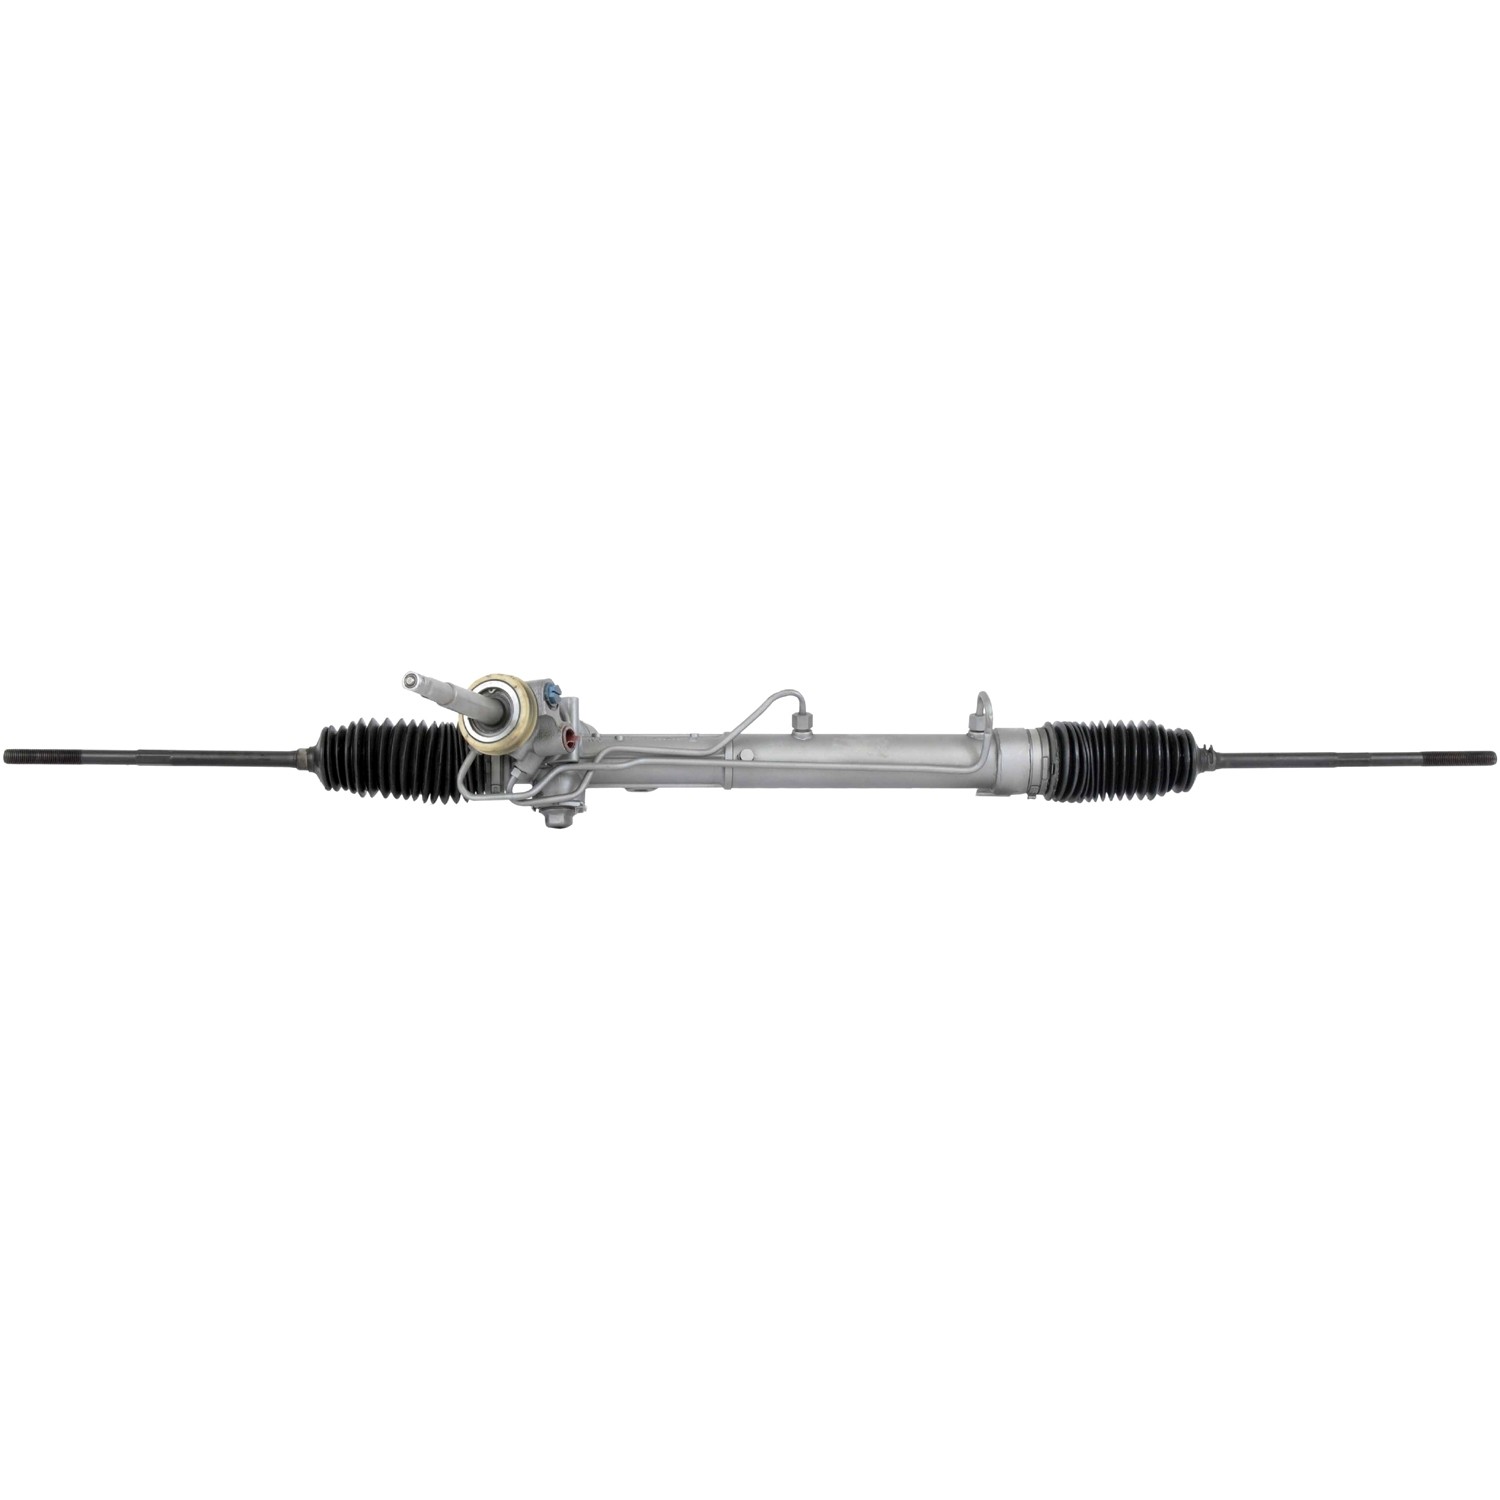 ACDELCO GOLD/PROFESSIONAL - Reman Rack & Pinion Complete Unit - DCC 36R0380